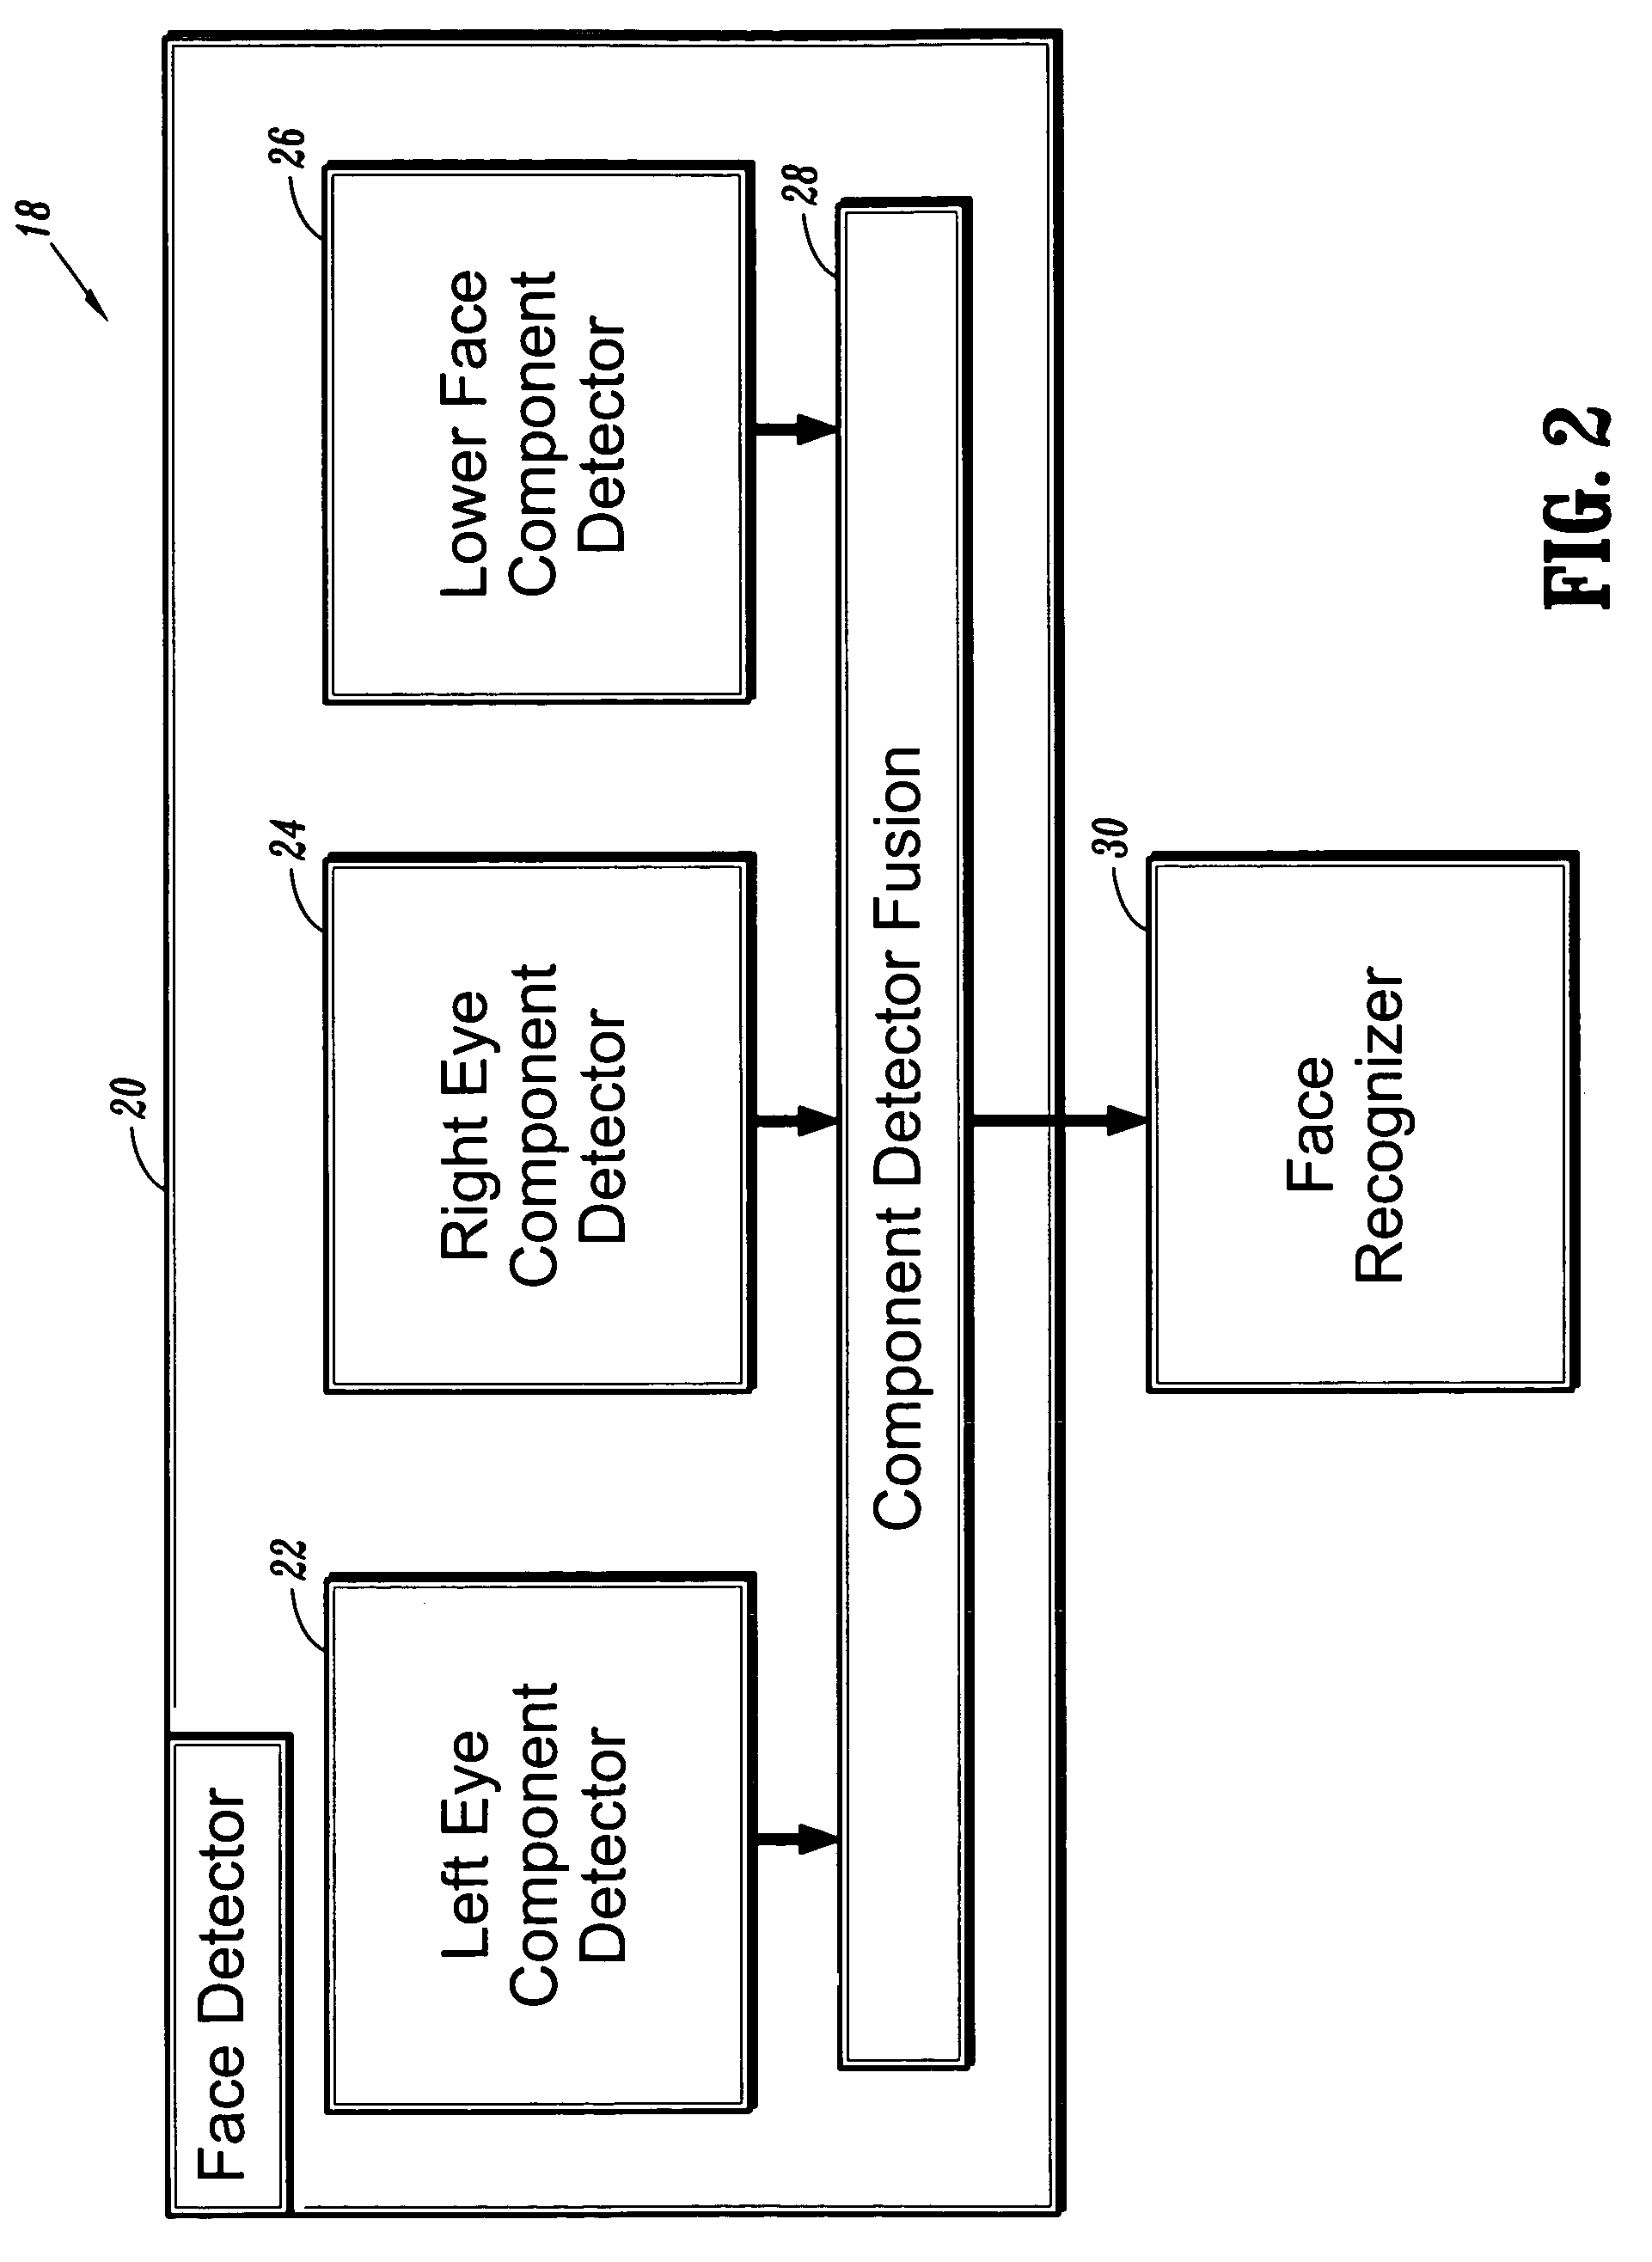 Systems and methods for face detection and recognition using infrared imaging